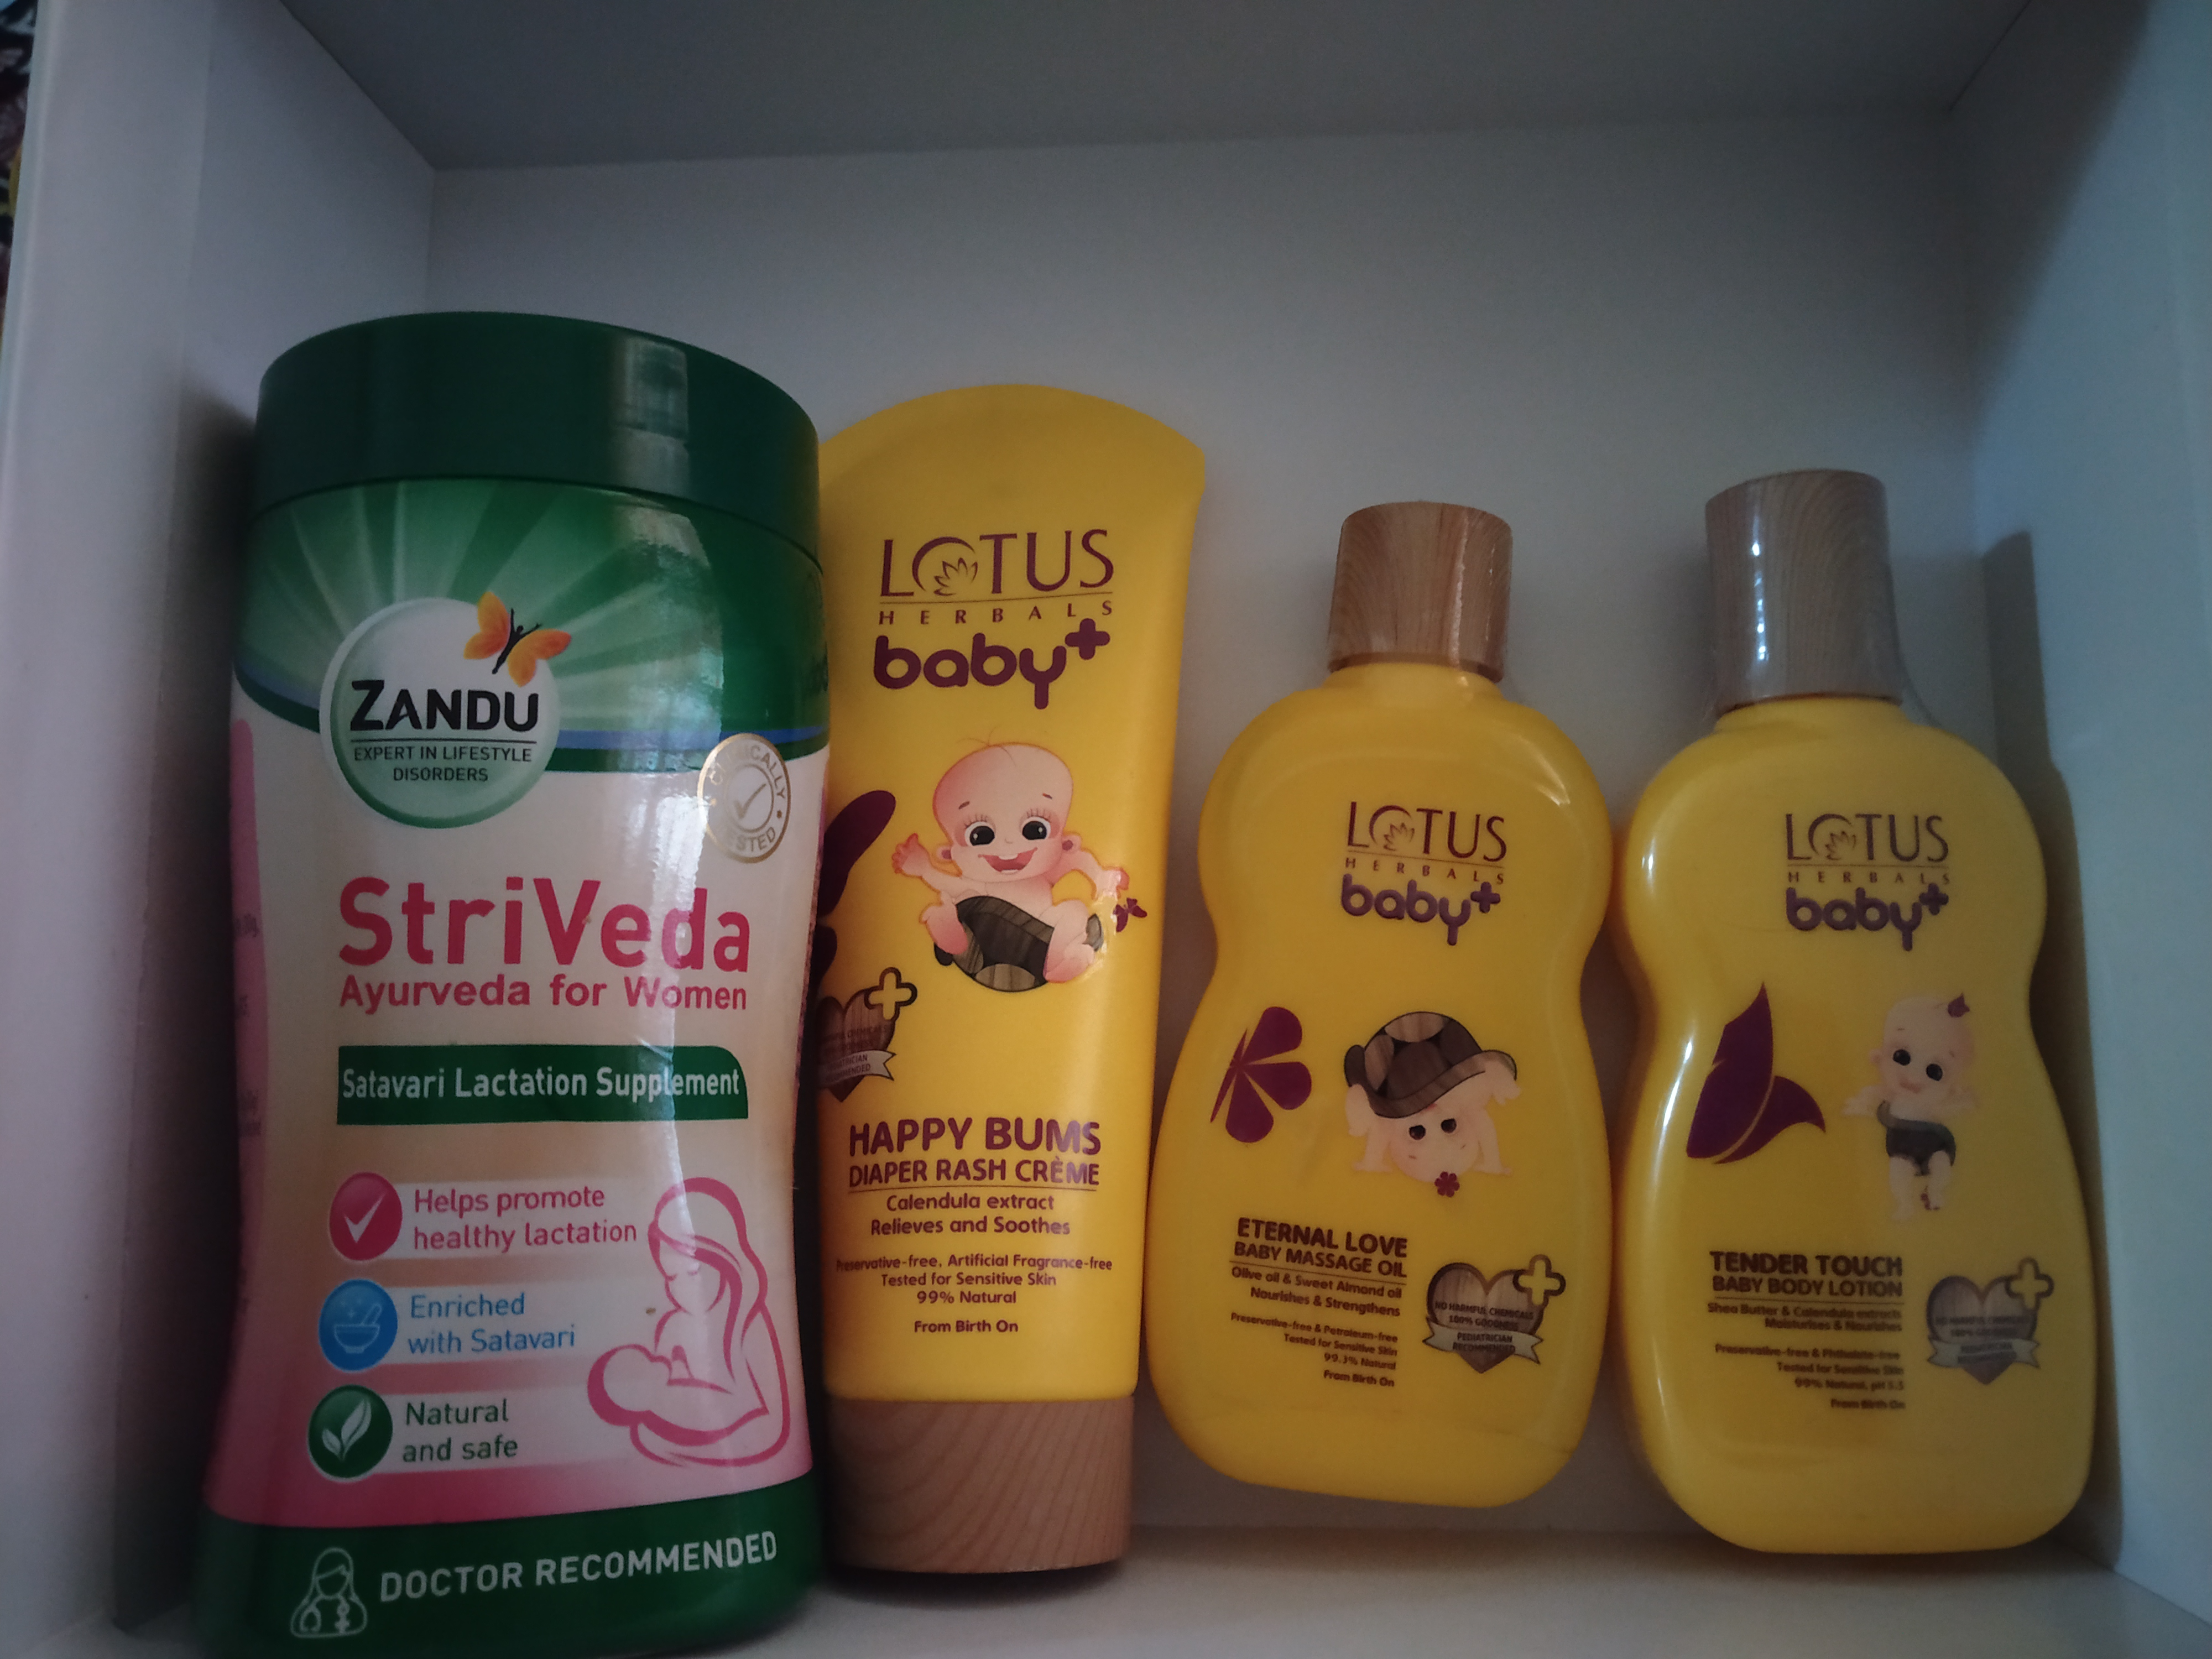 Lotus Herbals baby+ Tender Touch Baby Body Lotion-Soft smooth like lotus-By shilpachandel14